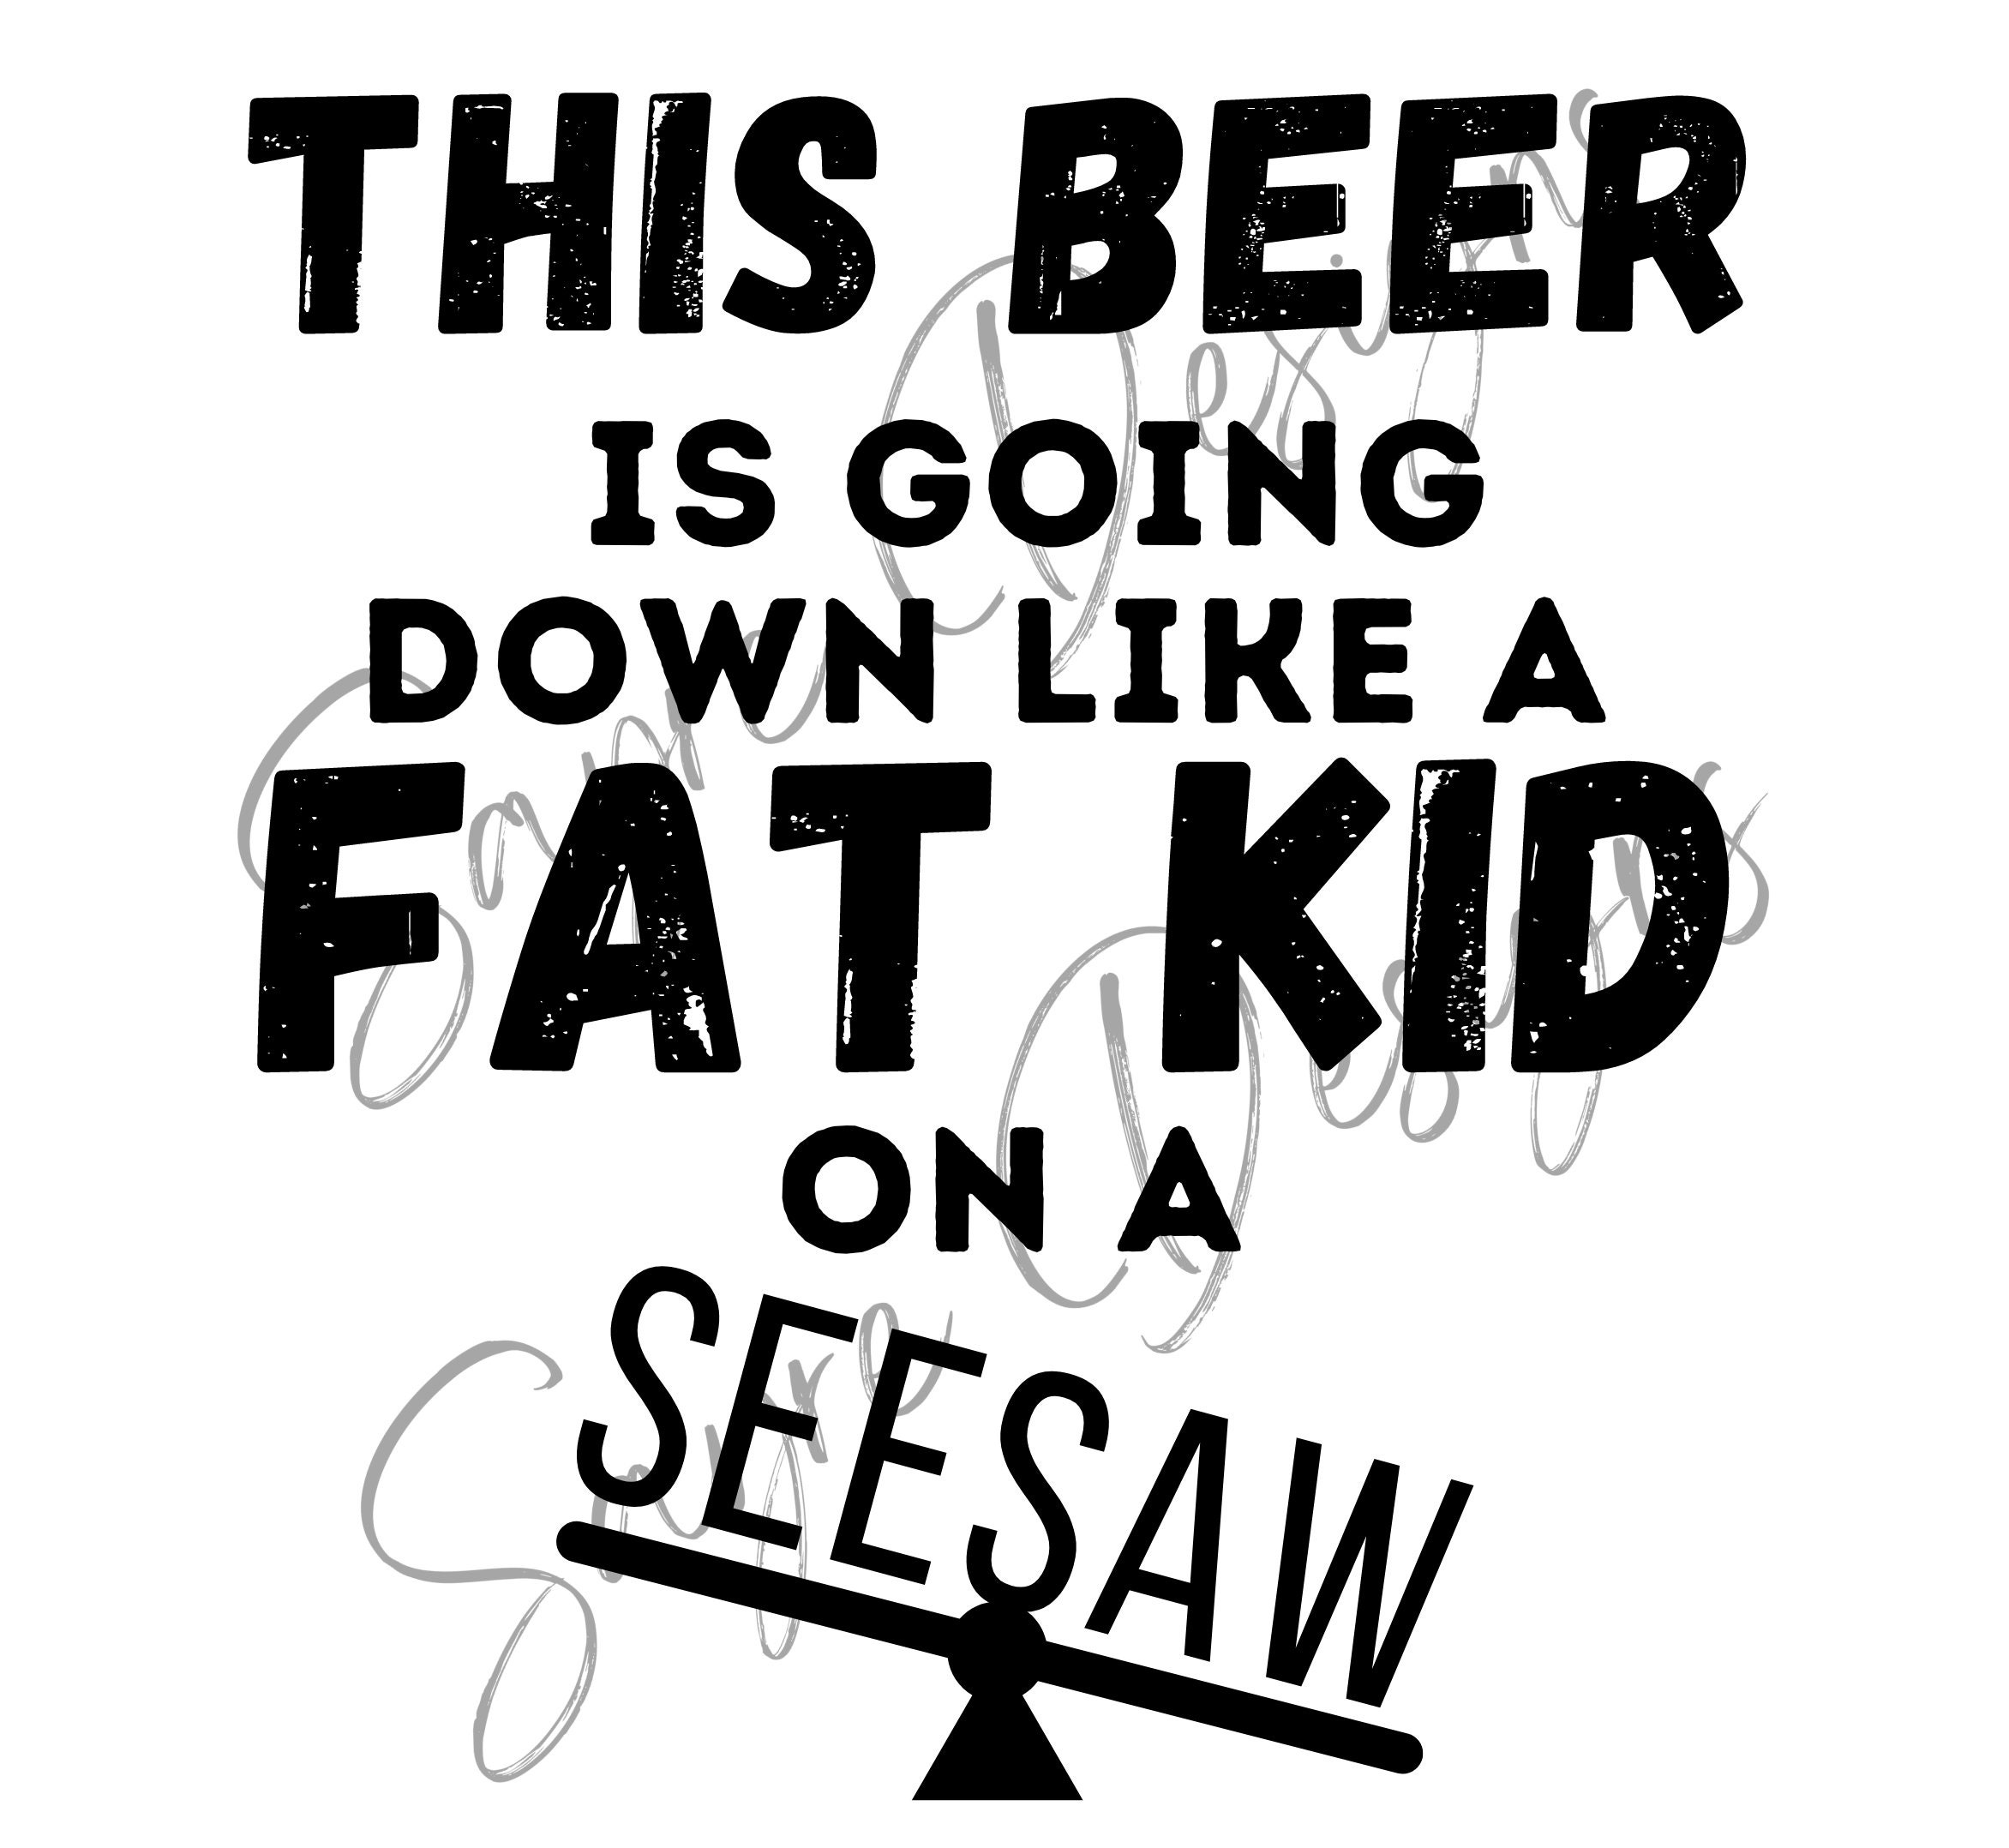 This beer is going down like a fat kid on a seesaw. Beer Koozie. – M E R I  W E T H E R